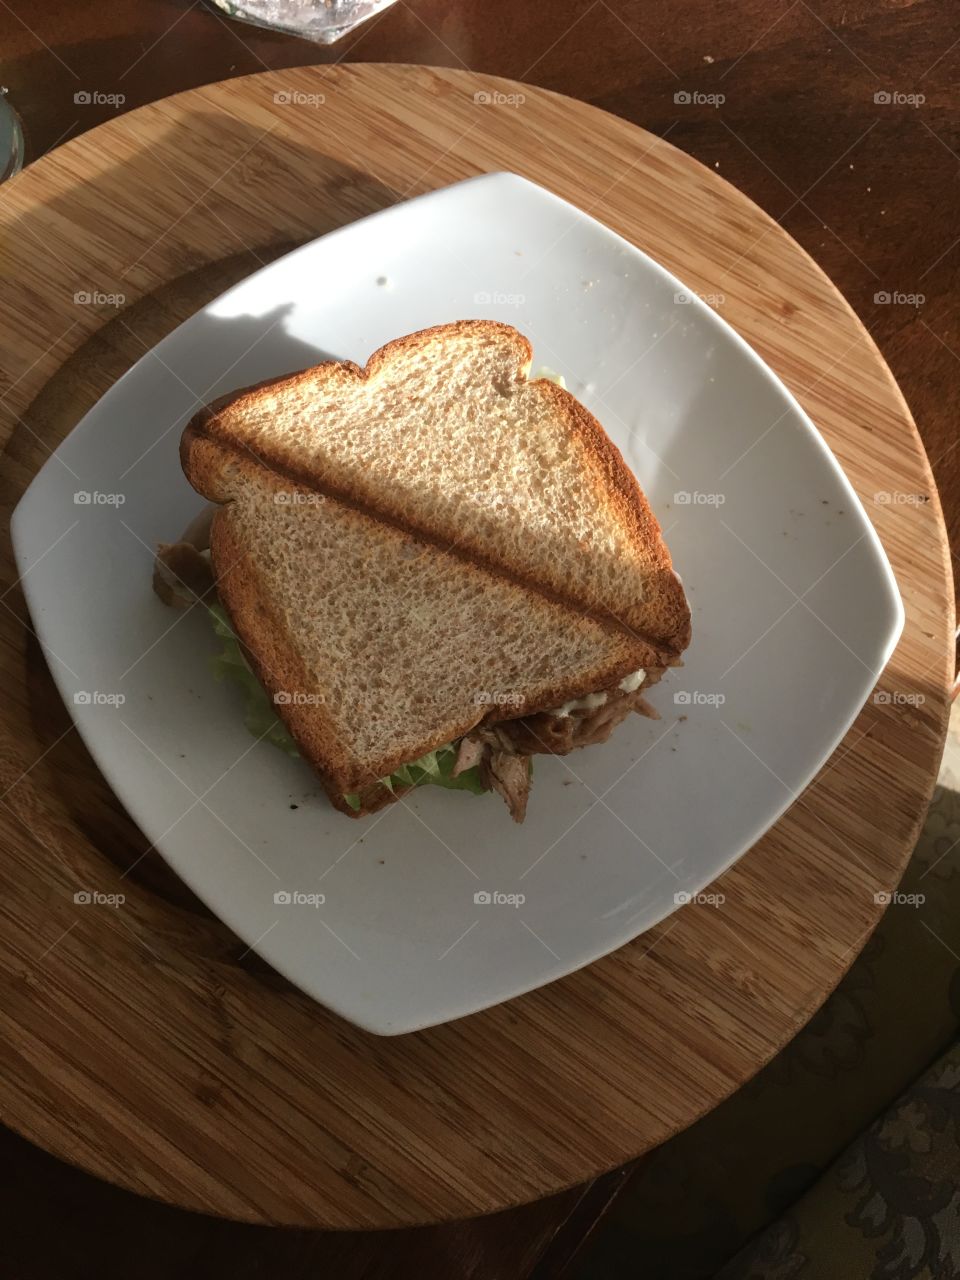 A spicy scrumptious chicken sandwich. From a top angle 